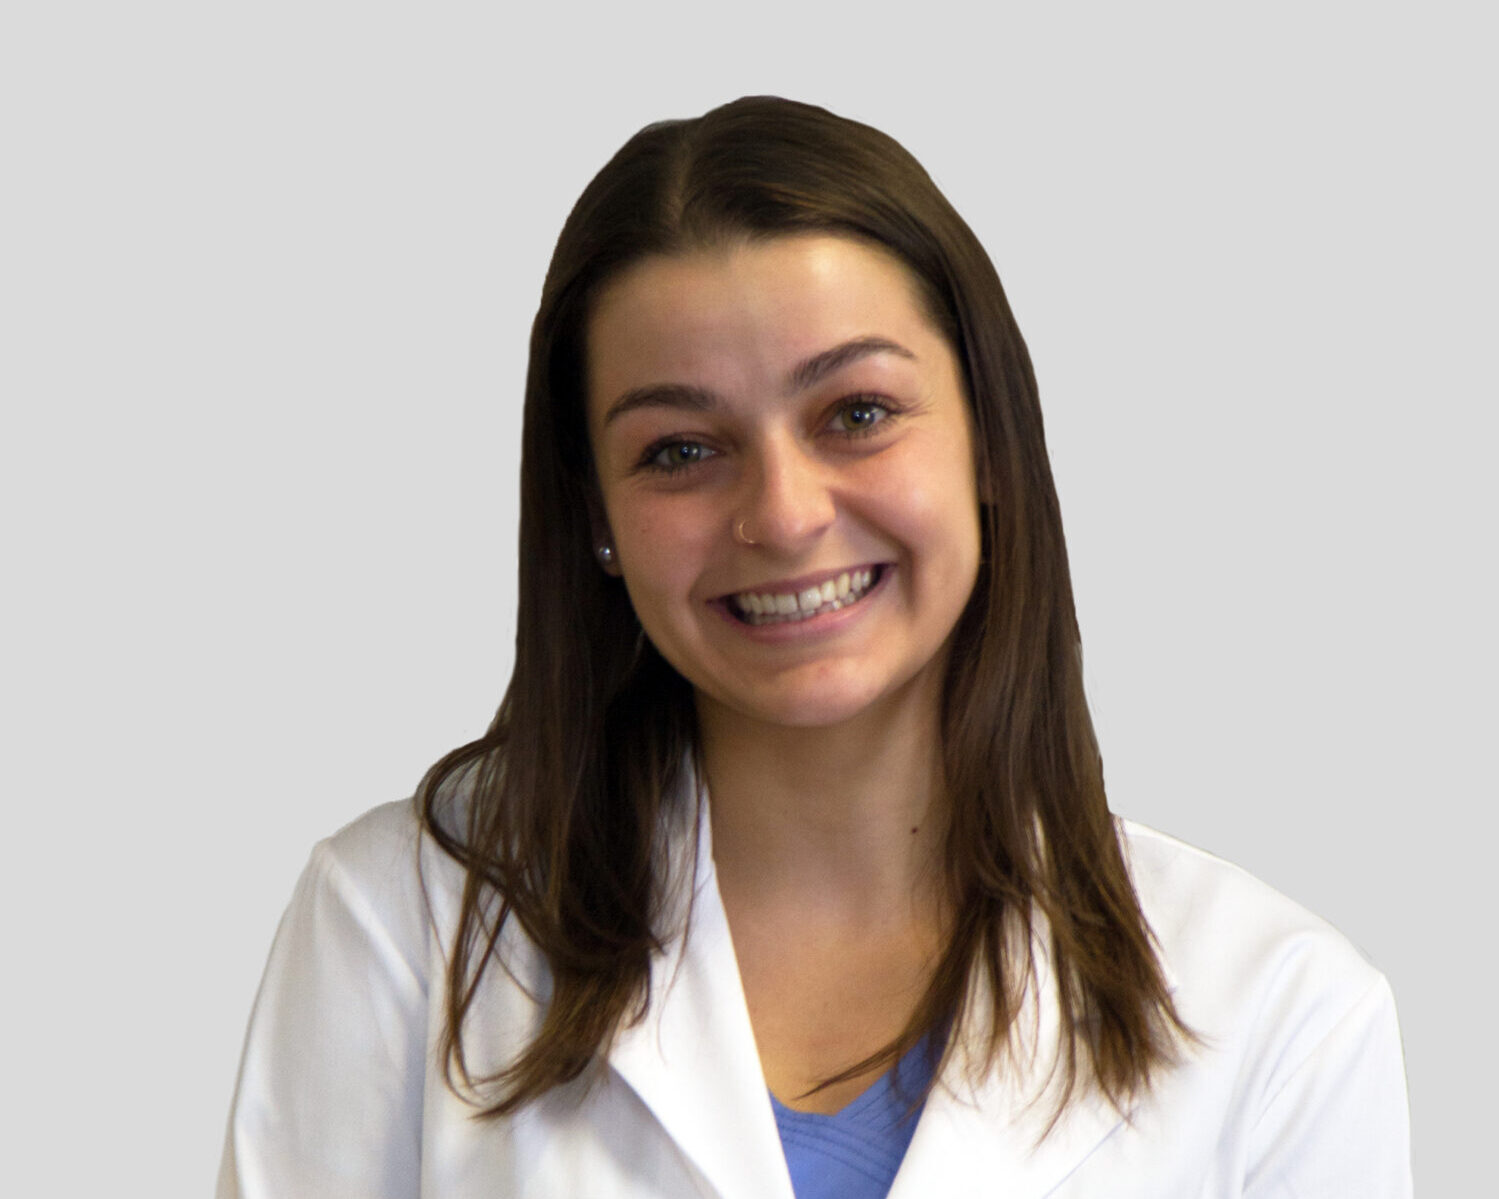 Dr. Victoria Albano of the Animal Medical Center in New York City